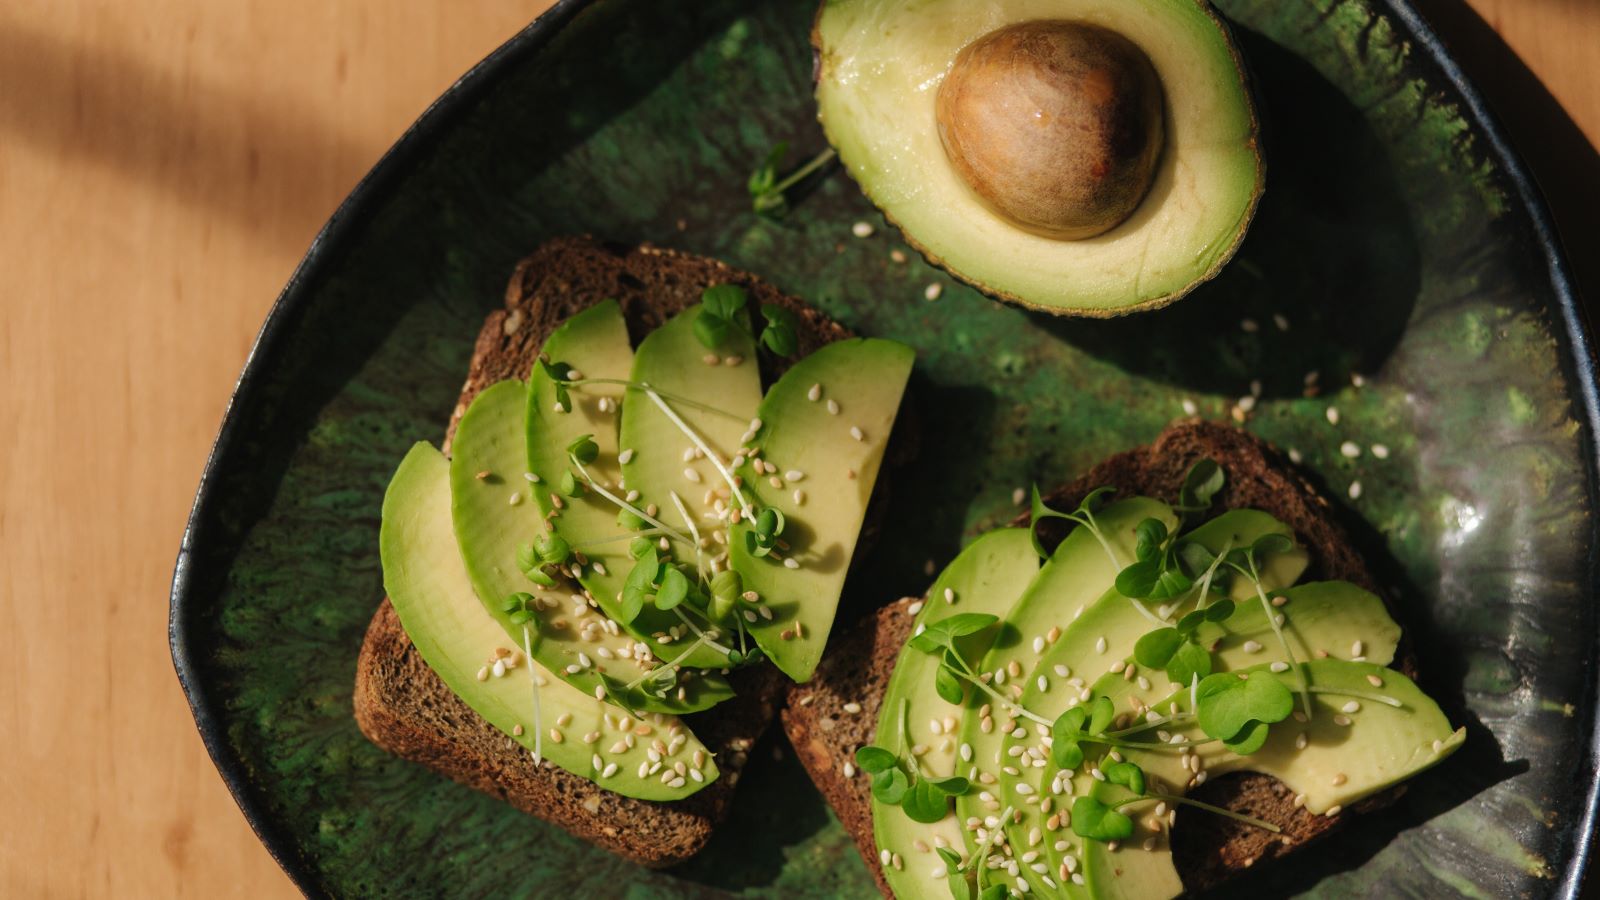 Avocado may be more than just a toast-topping worthy of your Instagram. This versatile fruit offers all sorts of health benefits.